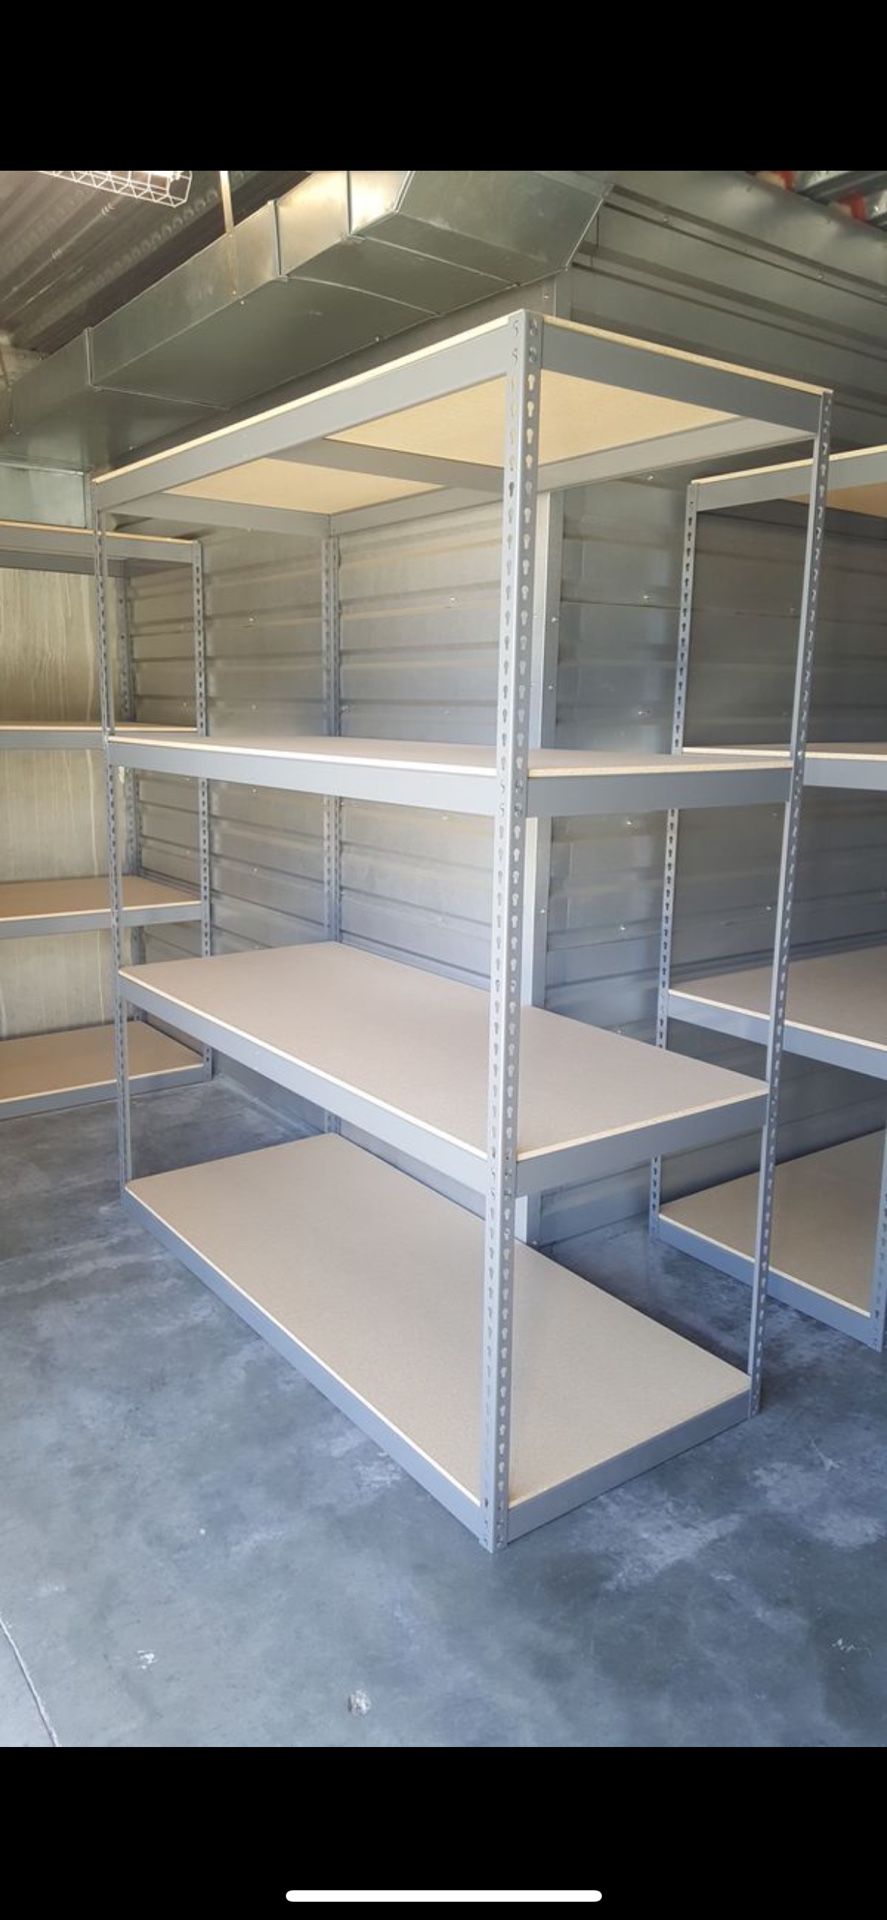 Shelving 72 in W x 30 in D Industrial Boltless Warehouse Storage Racks Stronger Than Homedepot Lowes And Costco Delivery Available